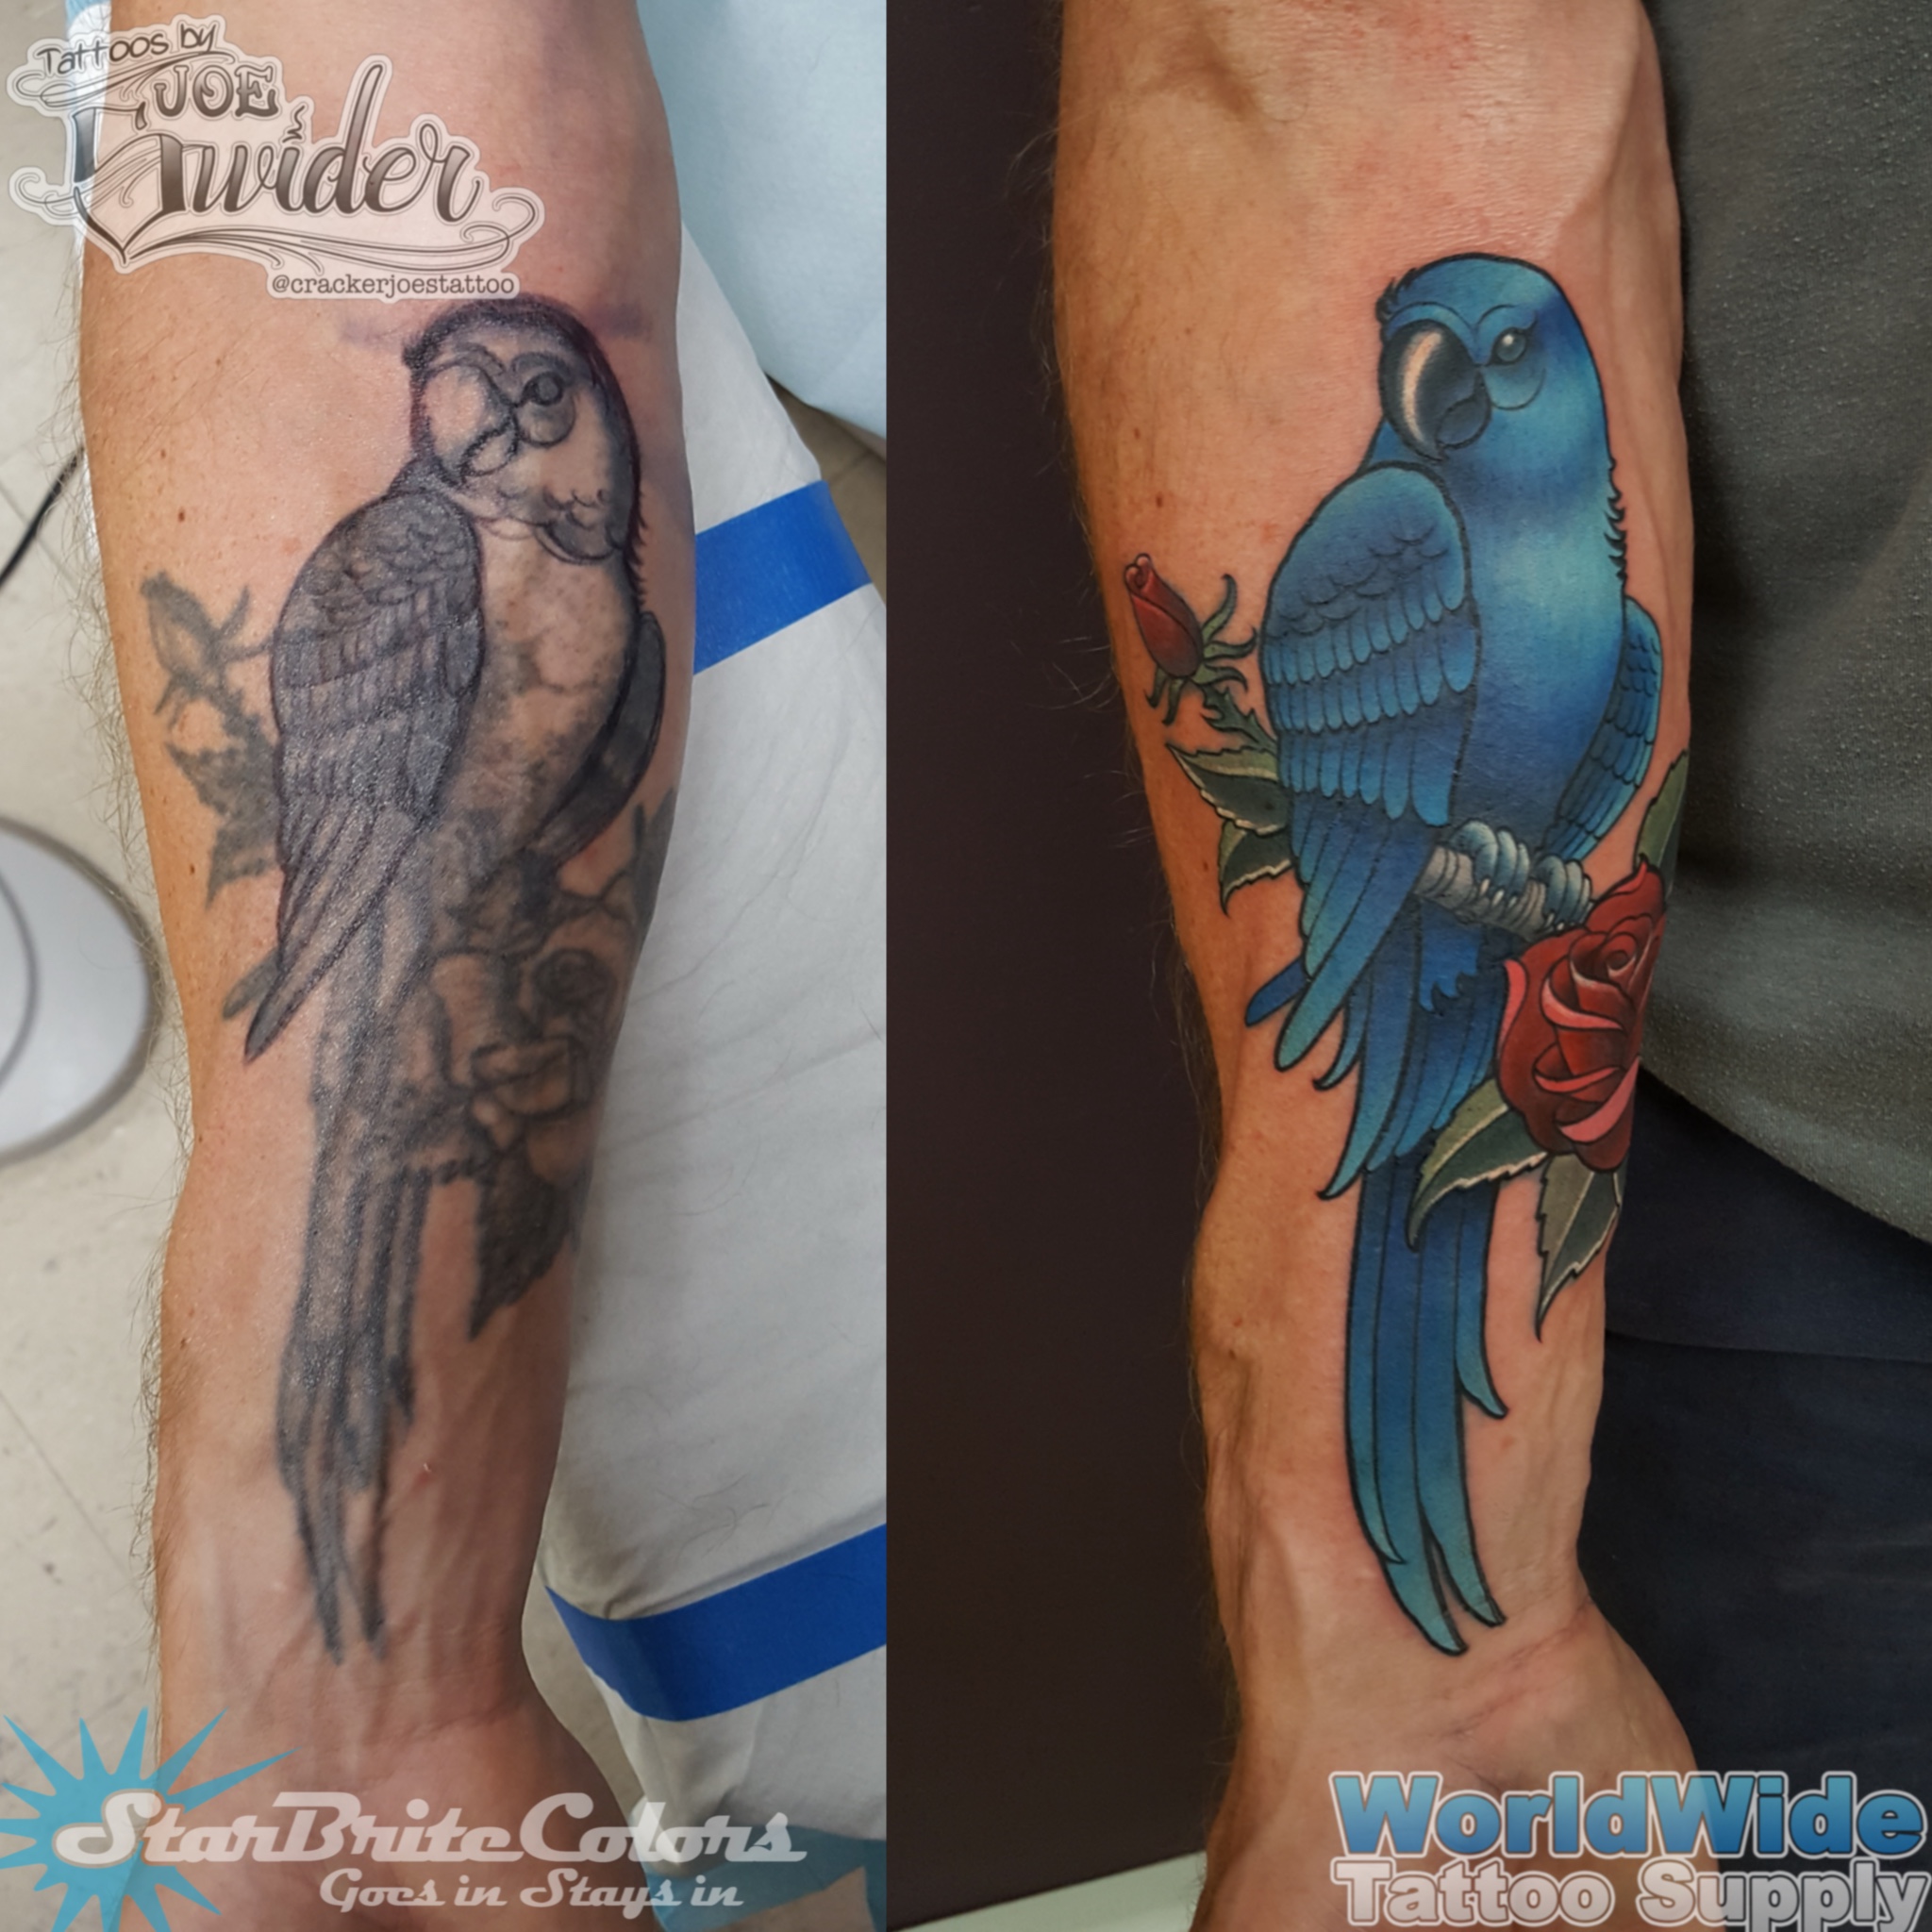 Parrot Cover Up Tattoo by Cracker Joe Swider in CT